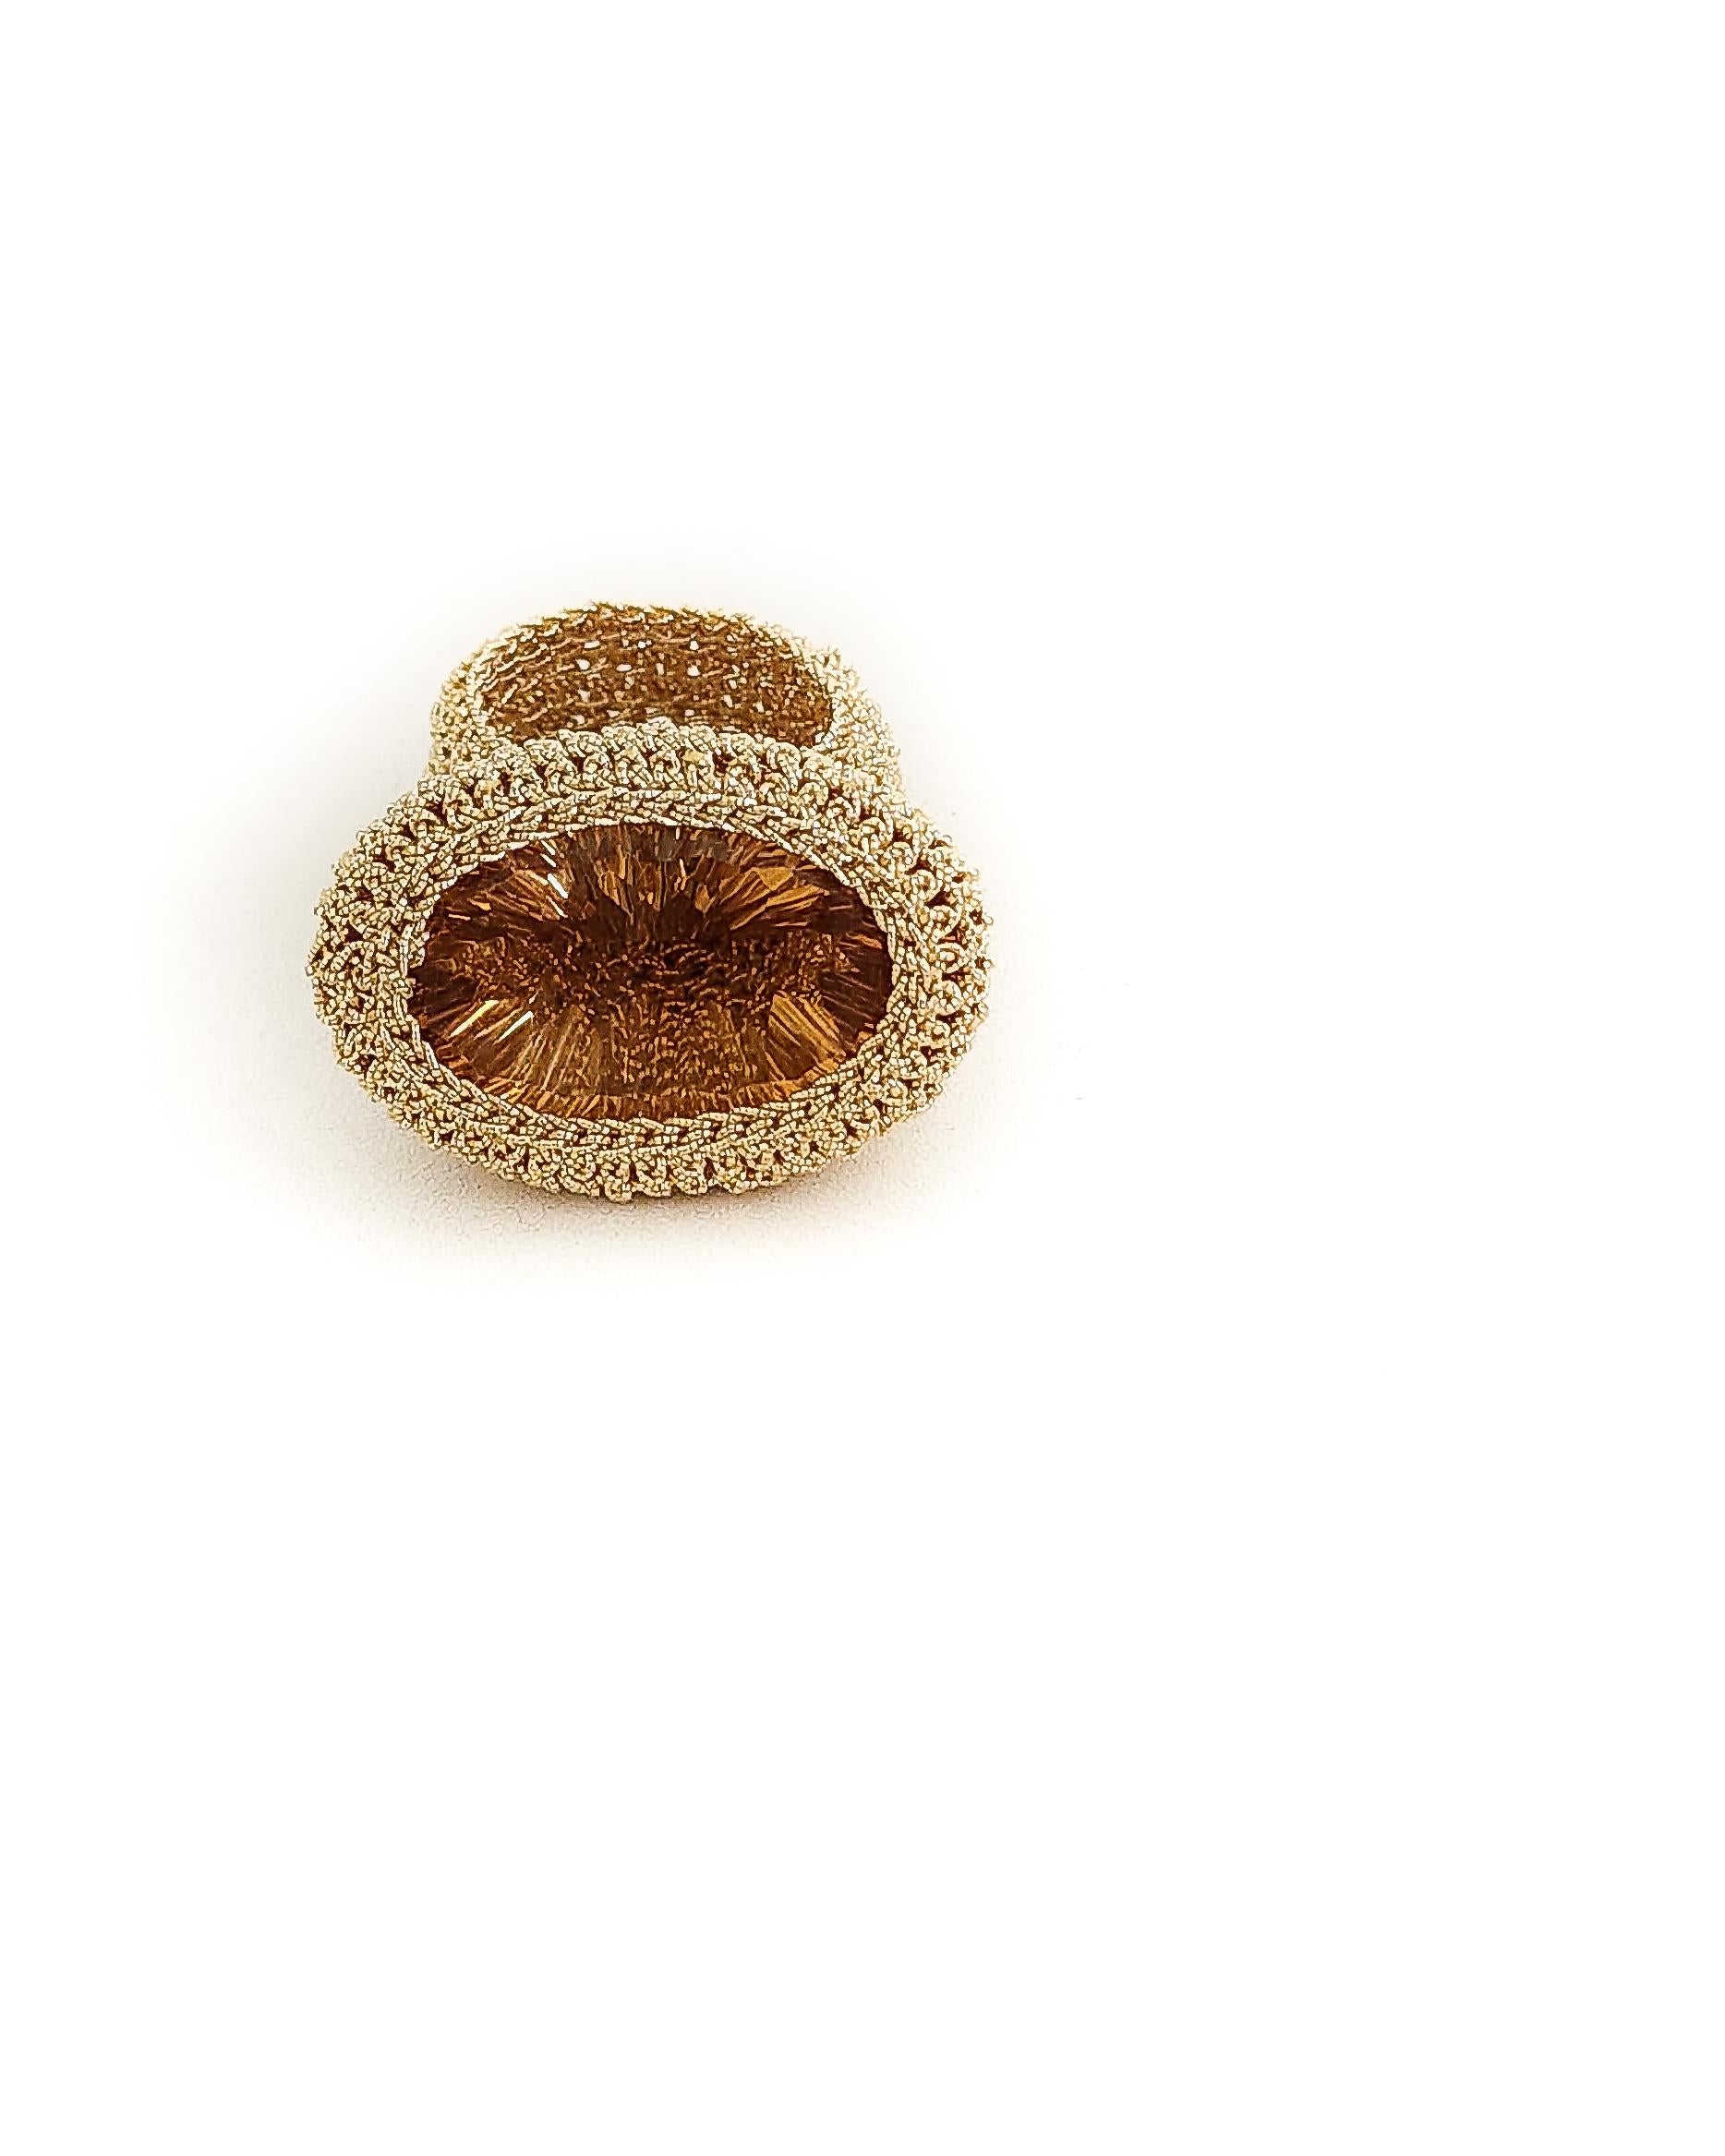 Beautiful, one of a kind crochet ring. It is meticulously handcrafted with 18 karat gold thread. The thread is made of an 18 karat gold wire which is flattened and wrapped around a cotton thread. The stone is a beautiful dark golden oval shaped,